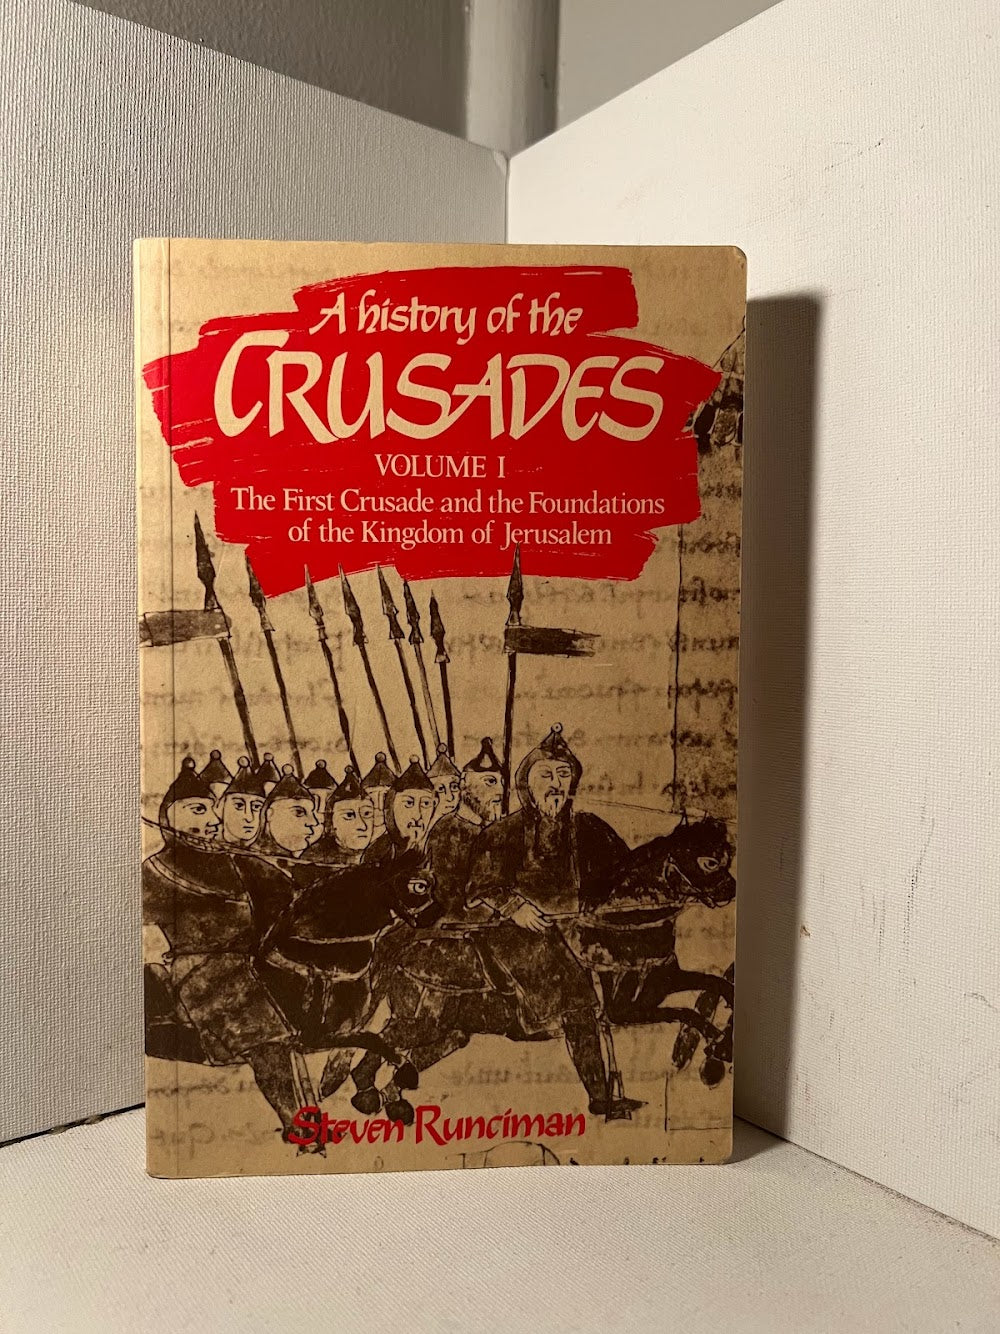 A History of the Crusades by Steven Runciman